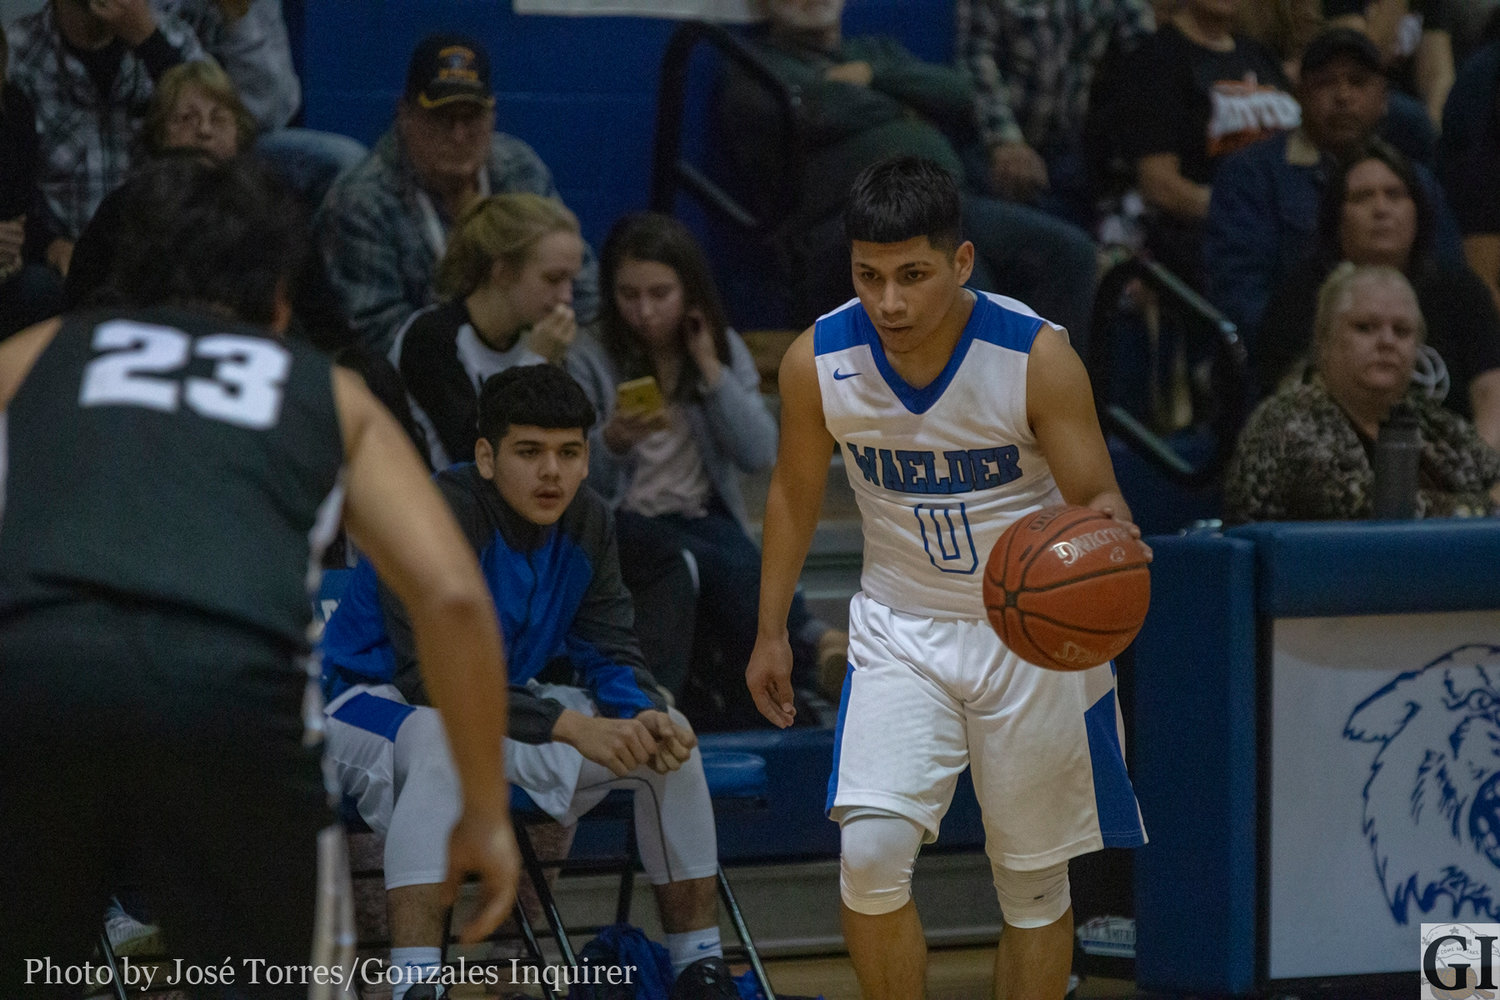 Carlos Reyes (0) ended his night with seven points in Waelder’s 50-45 overtime loss against Moulton on Tuesday.